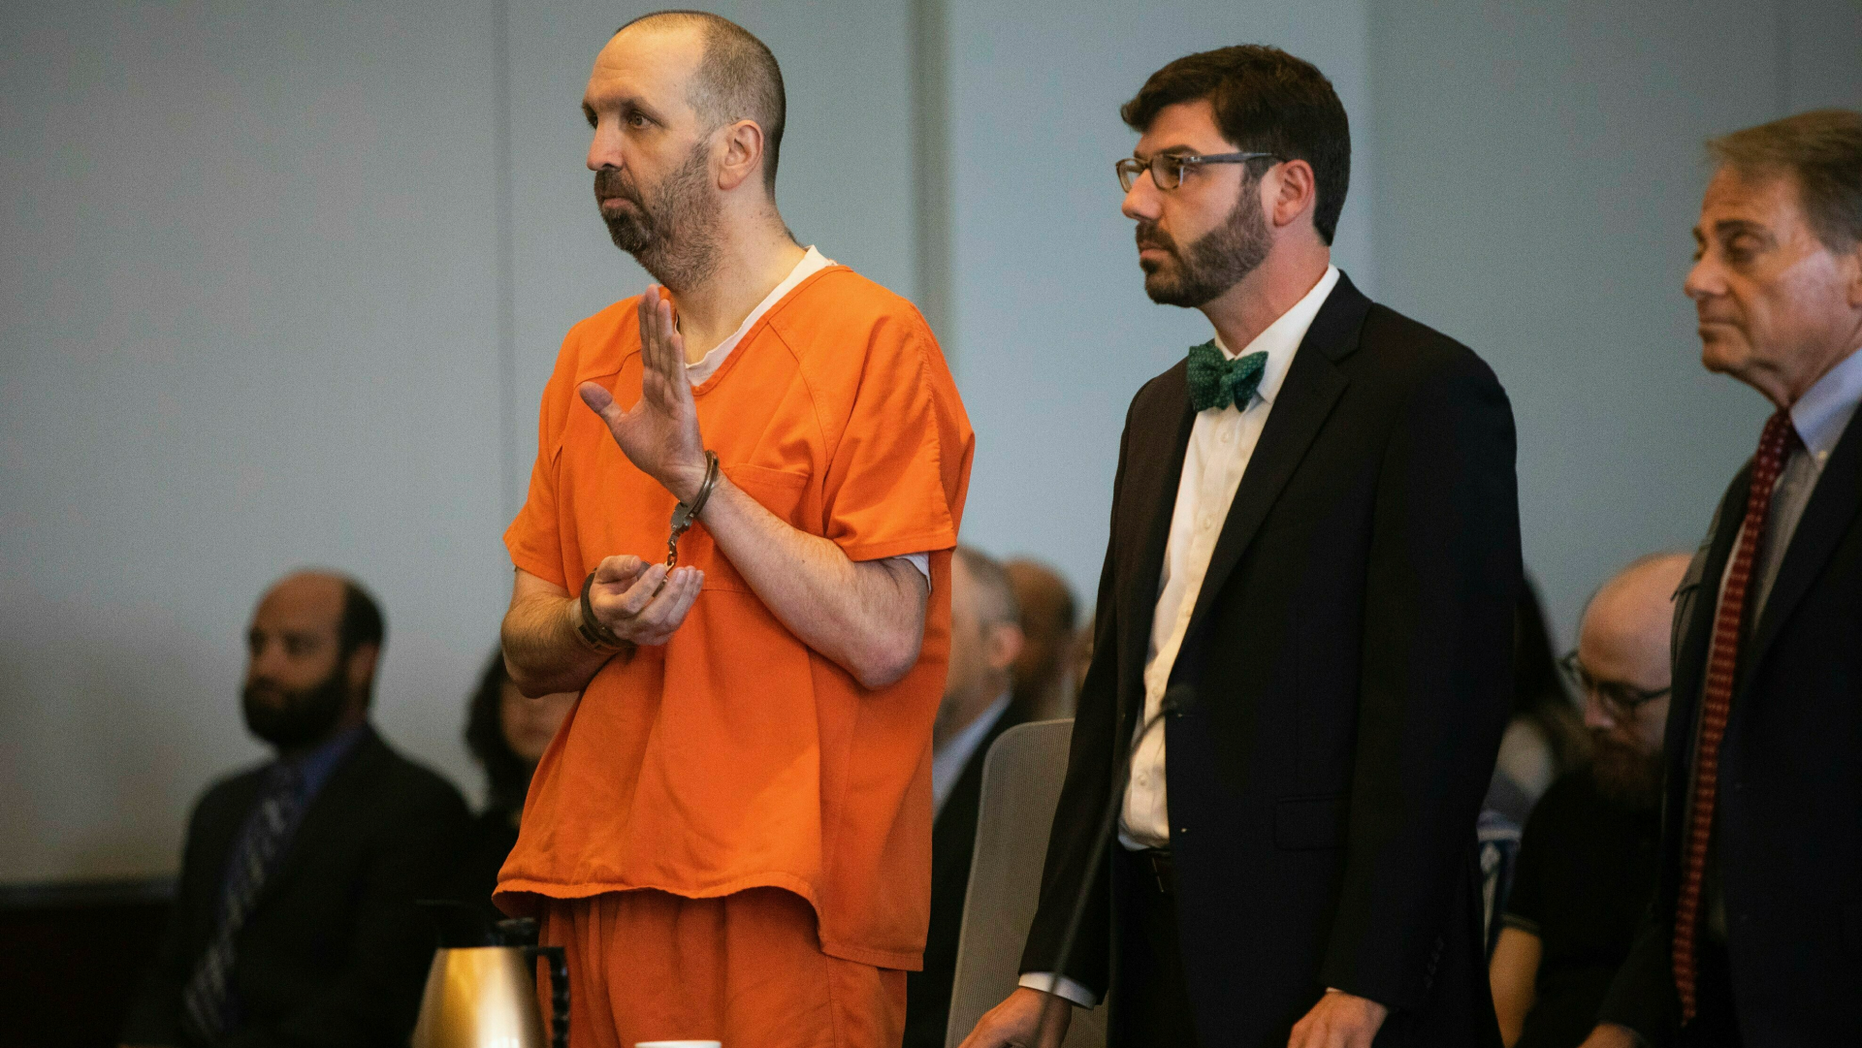 Craig Hicks pleads guilty to first-degree murder of three young Muslim men murdered in 2015 in a Chapel Hill apartment on Wednesday, June 12, 2019, at the Durham County Courthouse. Hicks will serve a life sentence without parole for the murder of his neighbors at Finley Forest condominiums: Deah Barakat, 23, his wife Yusor Abu-Salha, 21, and his sister, Razan Abul Salha, 19 years old. (Long Travis / The News & Observer via AP)